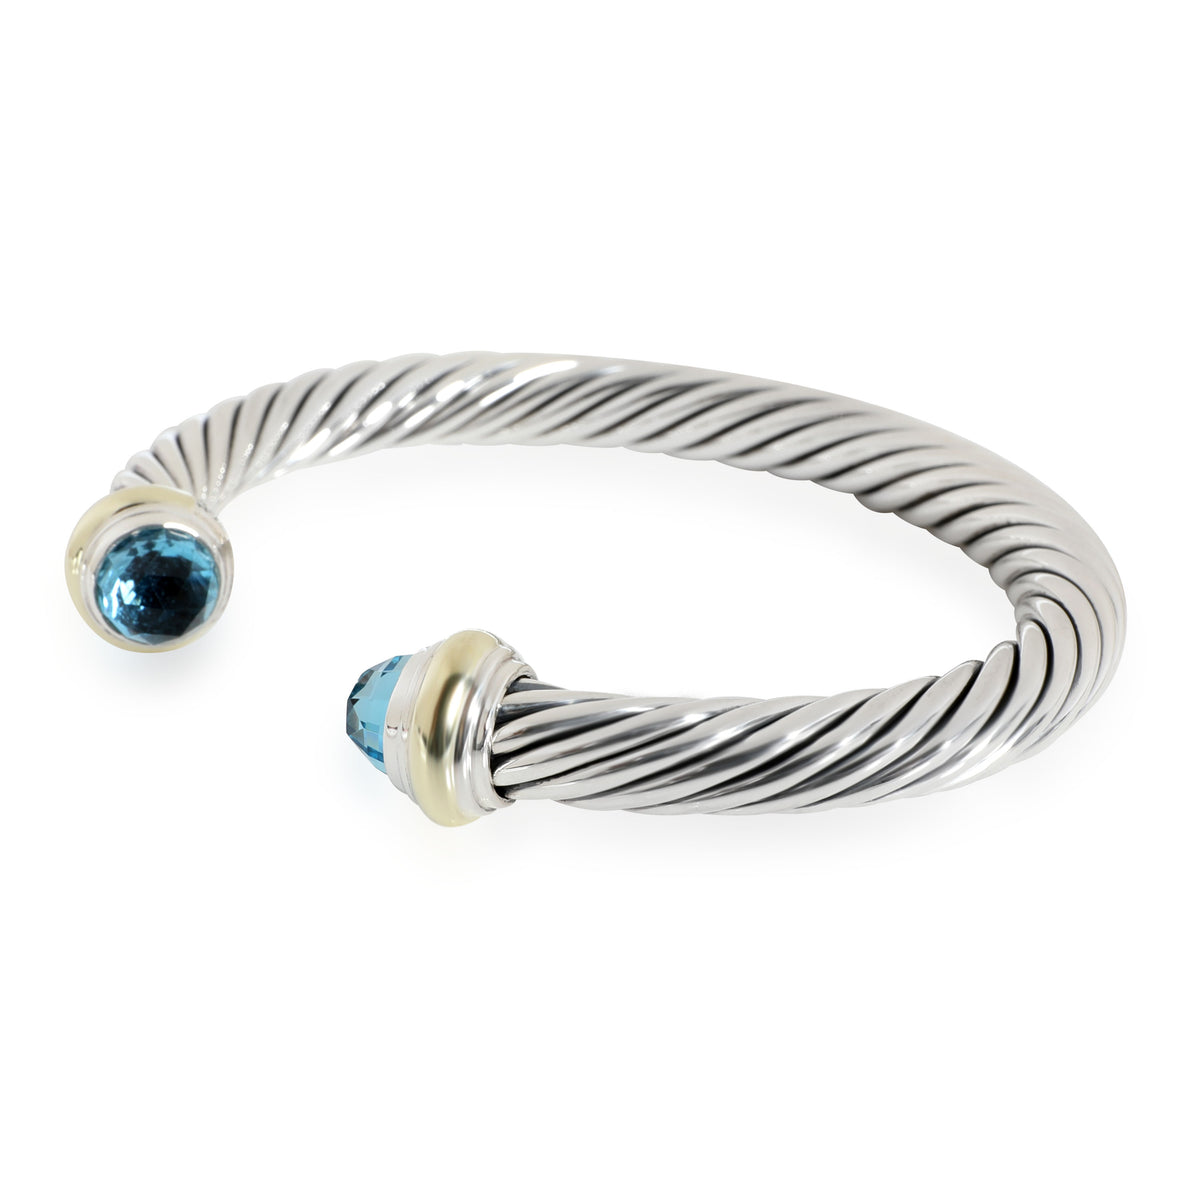 David Yurman Cable Bangle with Blue Topaz in 14K Gold/Sterling Silver Blue